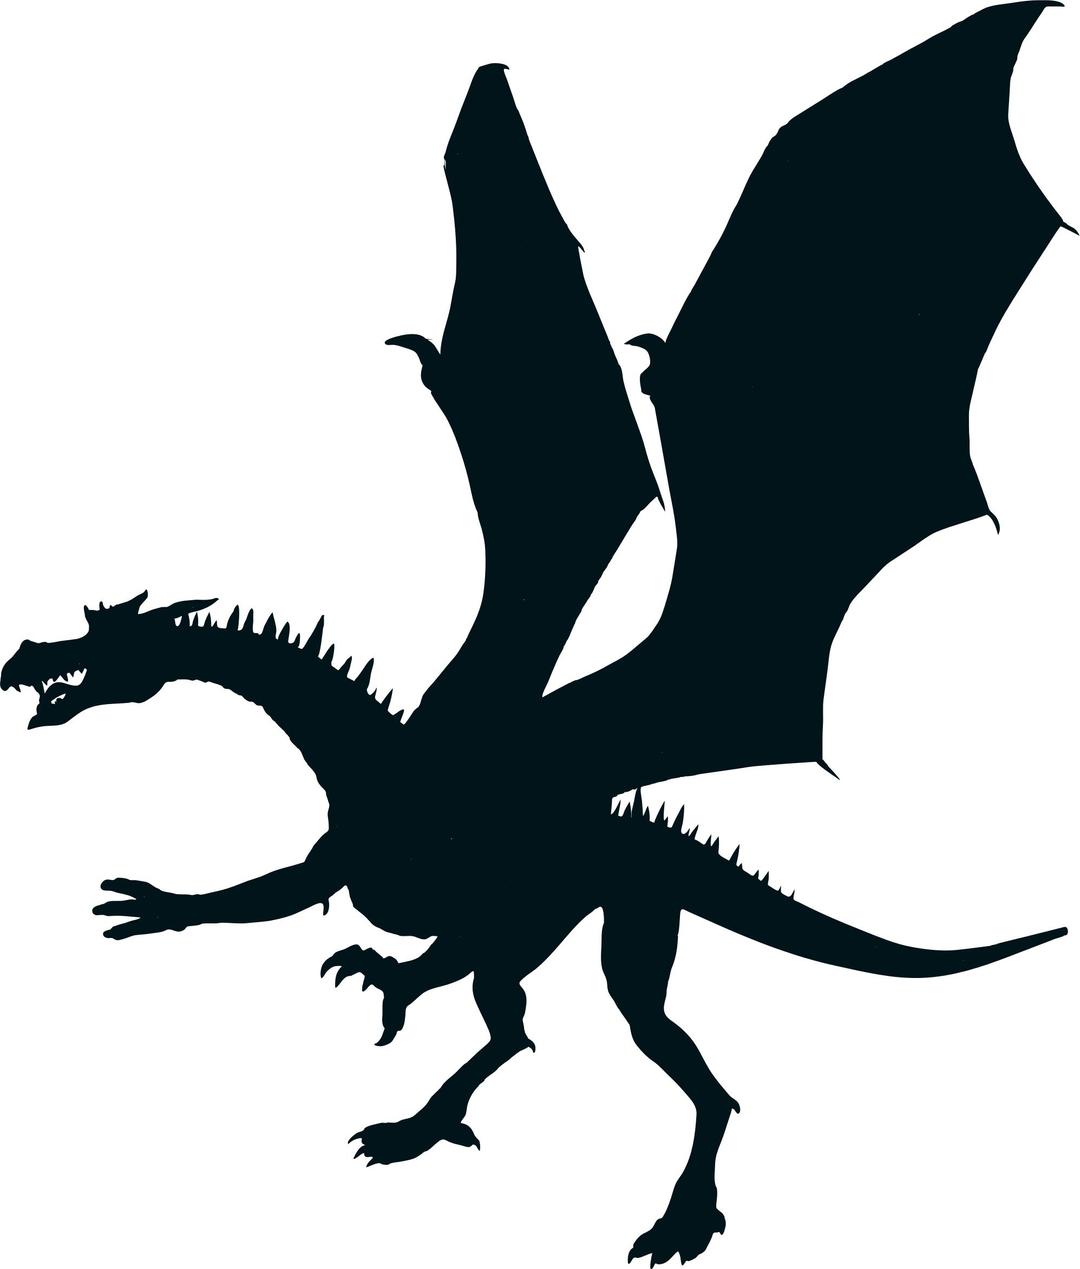 Green Dragon Silhouette png transparent